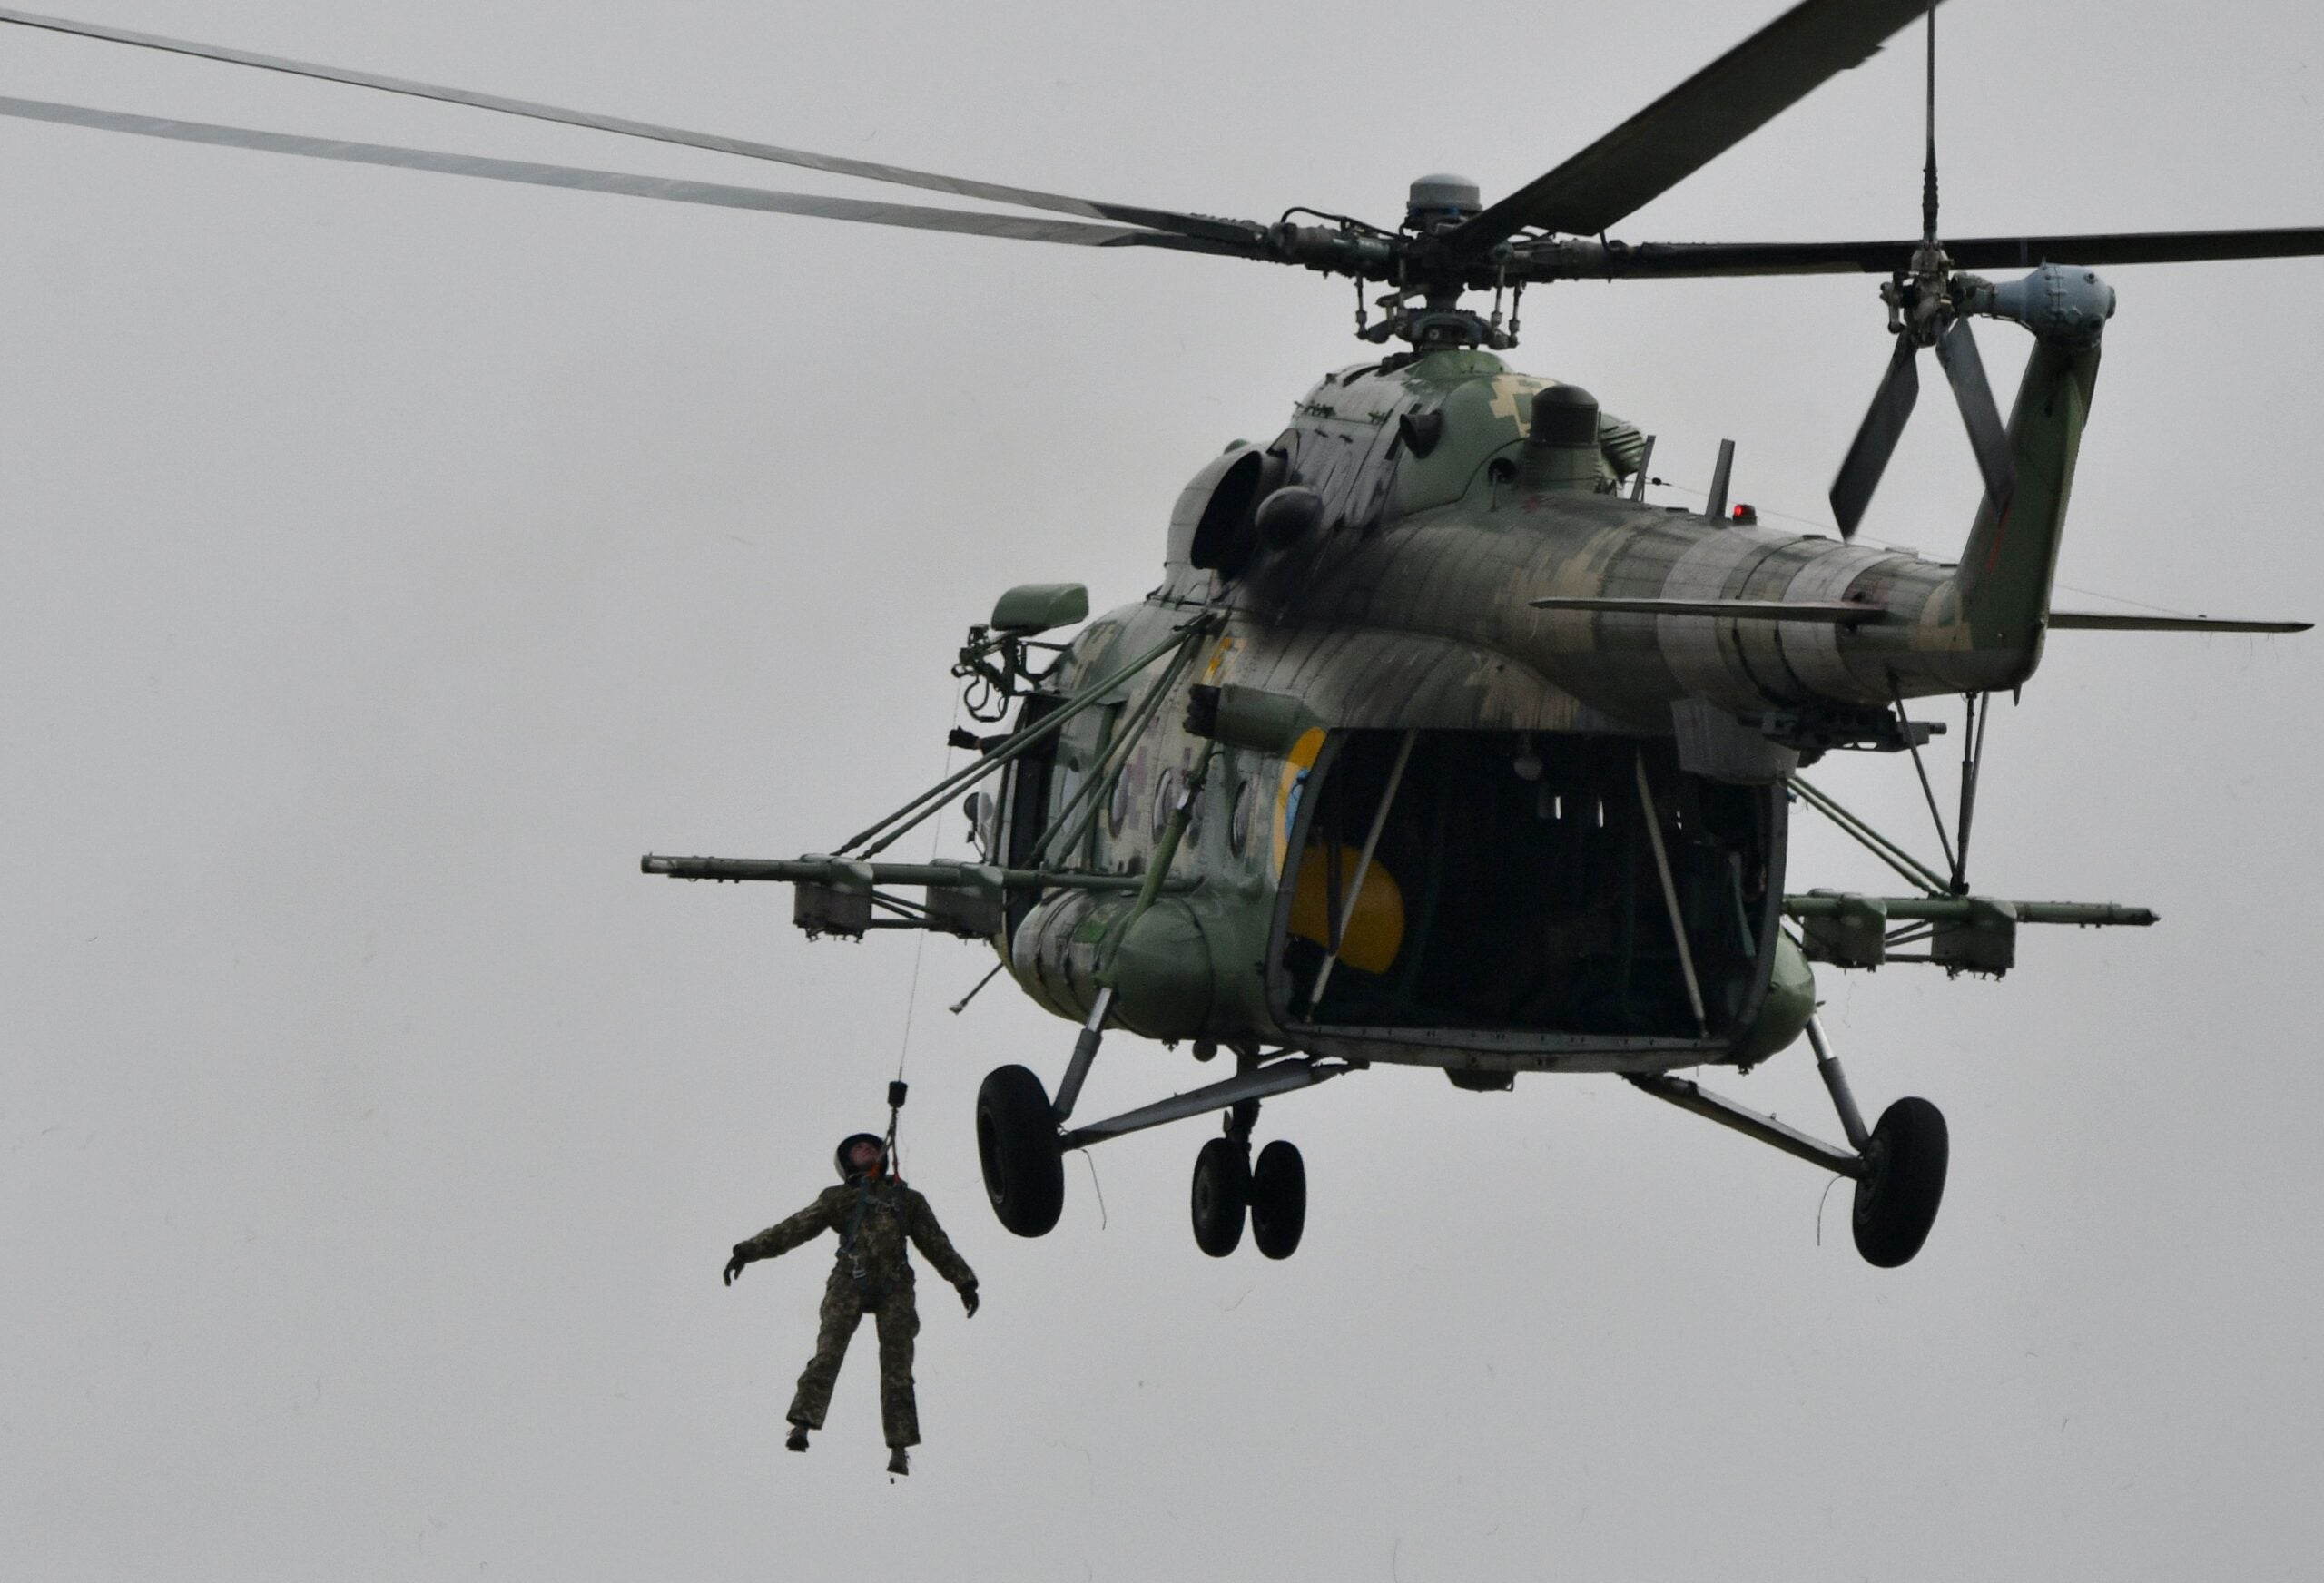 Ukrainian Mi-8 helicopter performs evacuation training for a pilot rescue during an air force exercises on Starokostyantyniv military airbase on October 12, 2018. - The large-scale air force exercises with the United States and other NATO countries "Clear Sky 2018", which will run until October 19, are being held in western Ukraine. Some 700 troops are taking part, half of them from NATO member countries including the United States, Britain, the Netherlands, Poland and Romania. US aircraft including F-15C Eagle fighter planes, Boeing KC-135 air refueling tanker, C-130J Super Hercules military transport planes and drones will train with about 30 Ukrainian aircraft. (Photo by Genya SAVILOV / AFP)        (Photo credit should read GENYA SAVILOV/AFP via Getty Images)